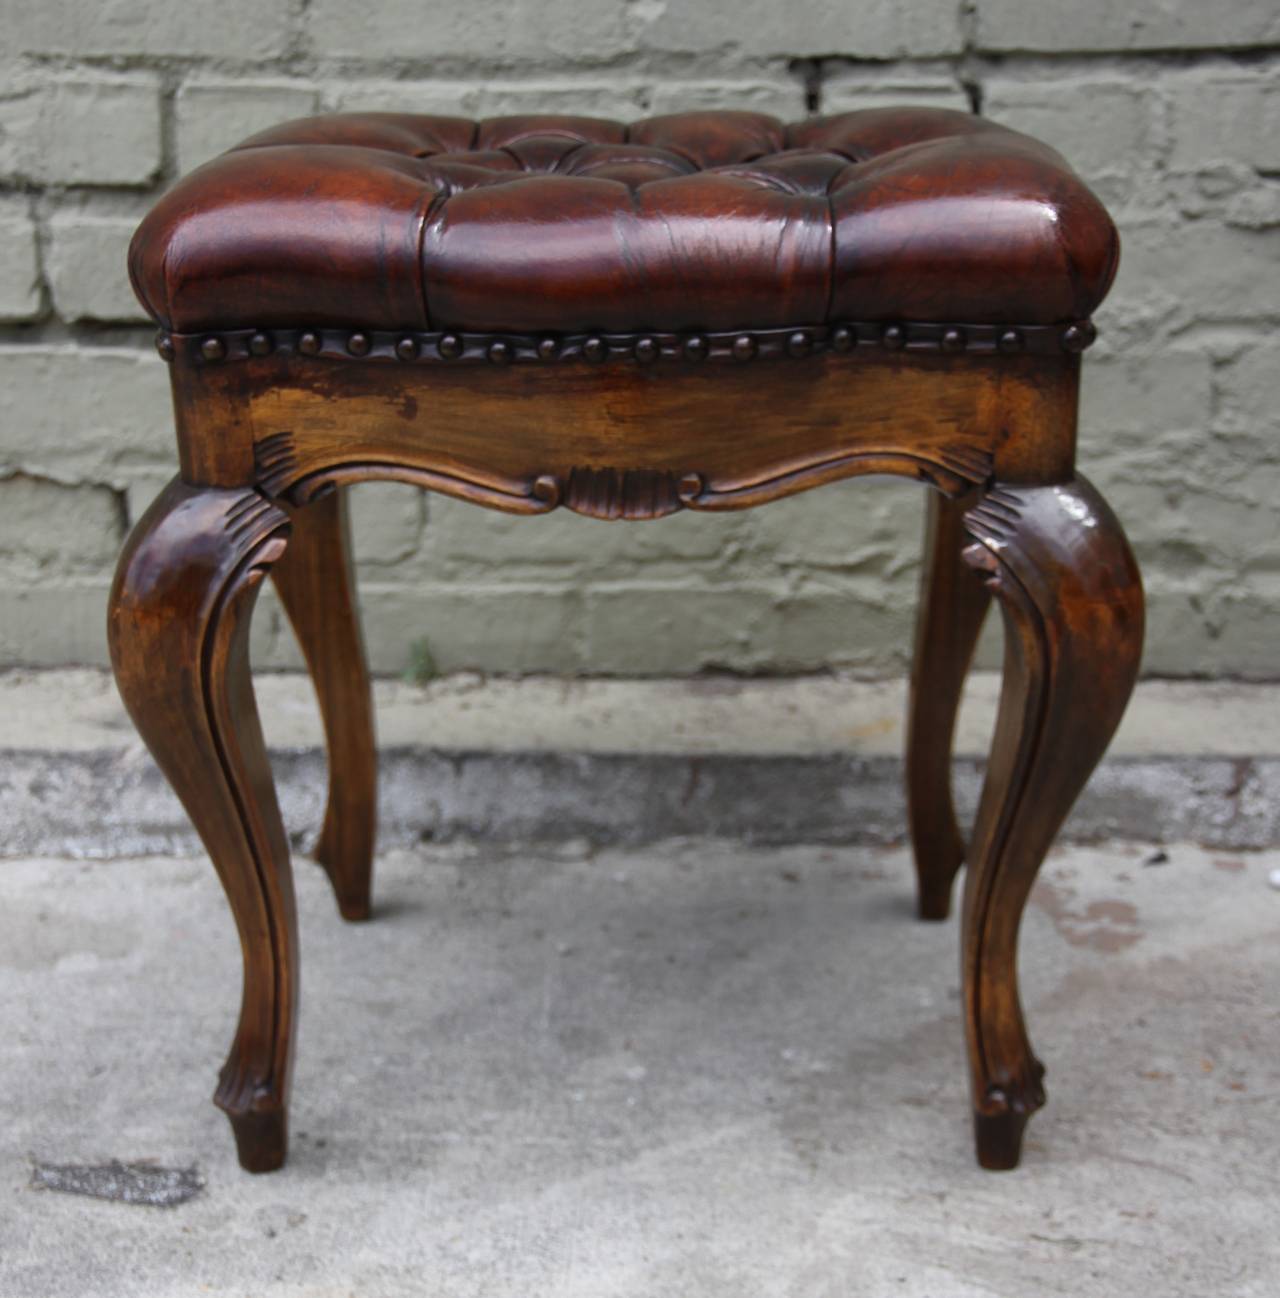 French leather tufted walnut benche standing on four cabriole legs with nailhead trim detail.